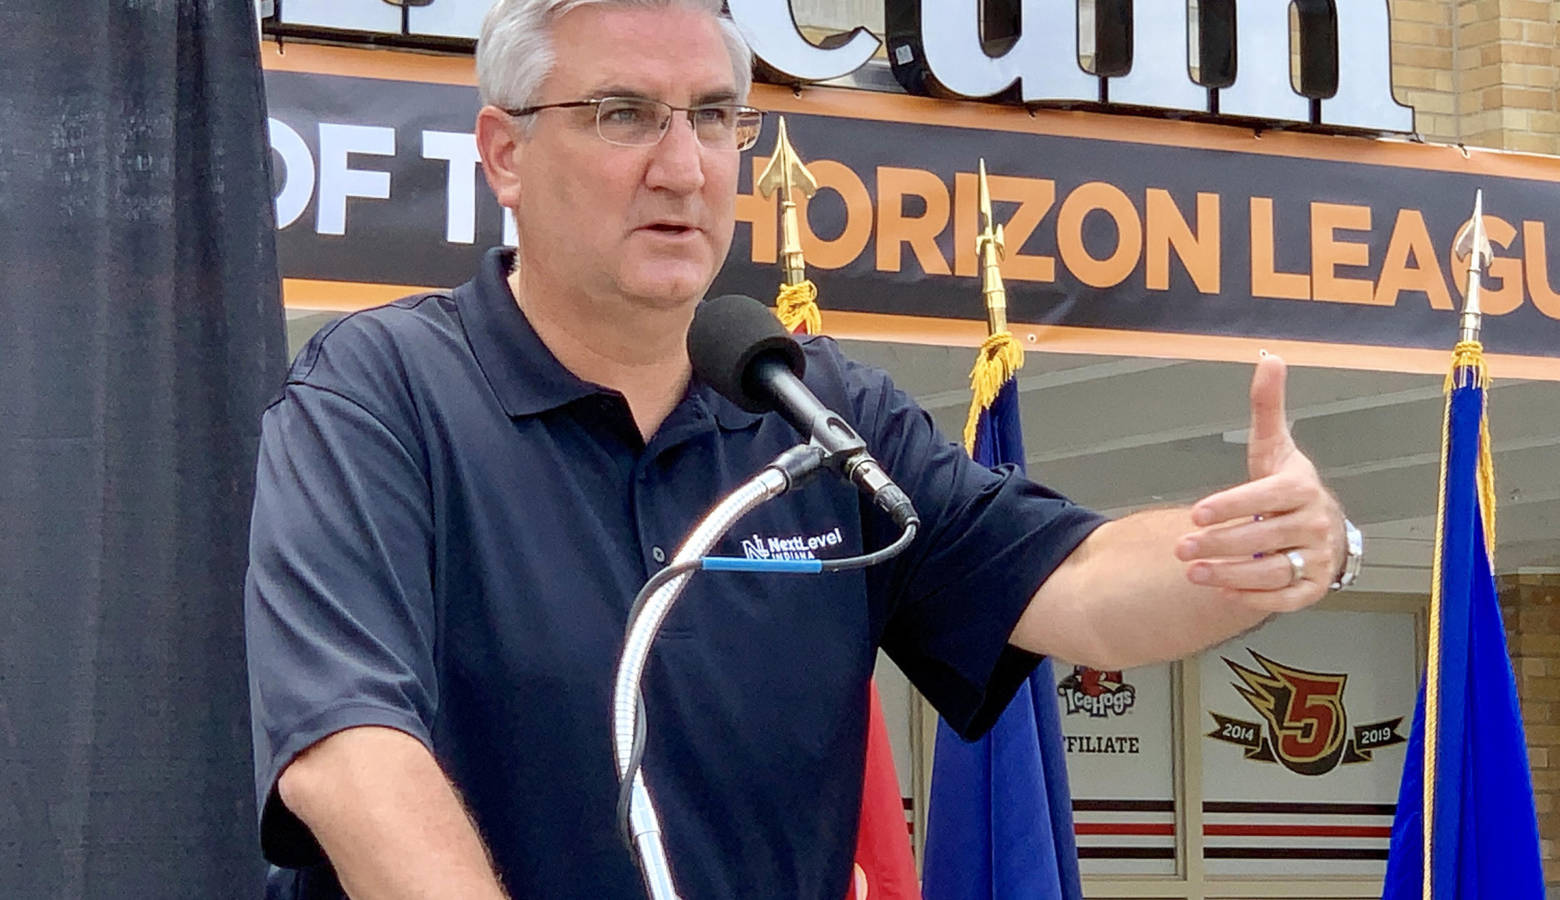 Gov. Eric Holcomb dodged questions about the role President Donald Trump’s rhetoric may have played in recent mass shootings in El Paso, Texas, and Dayton, Ohio. (Brandon Smith/IPB News)